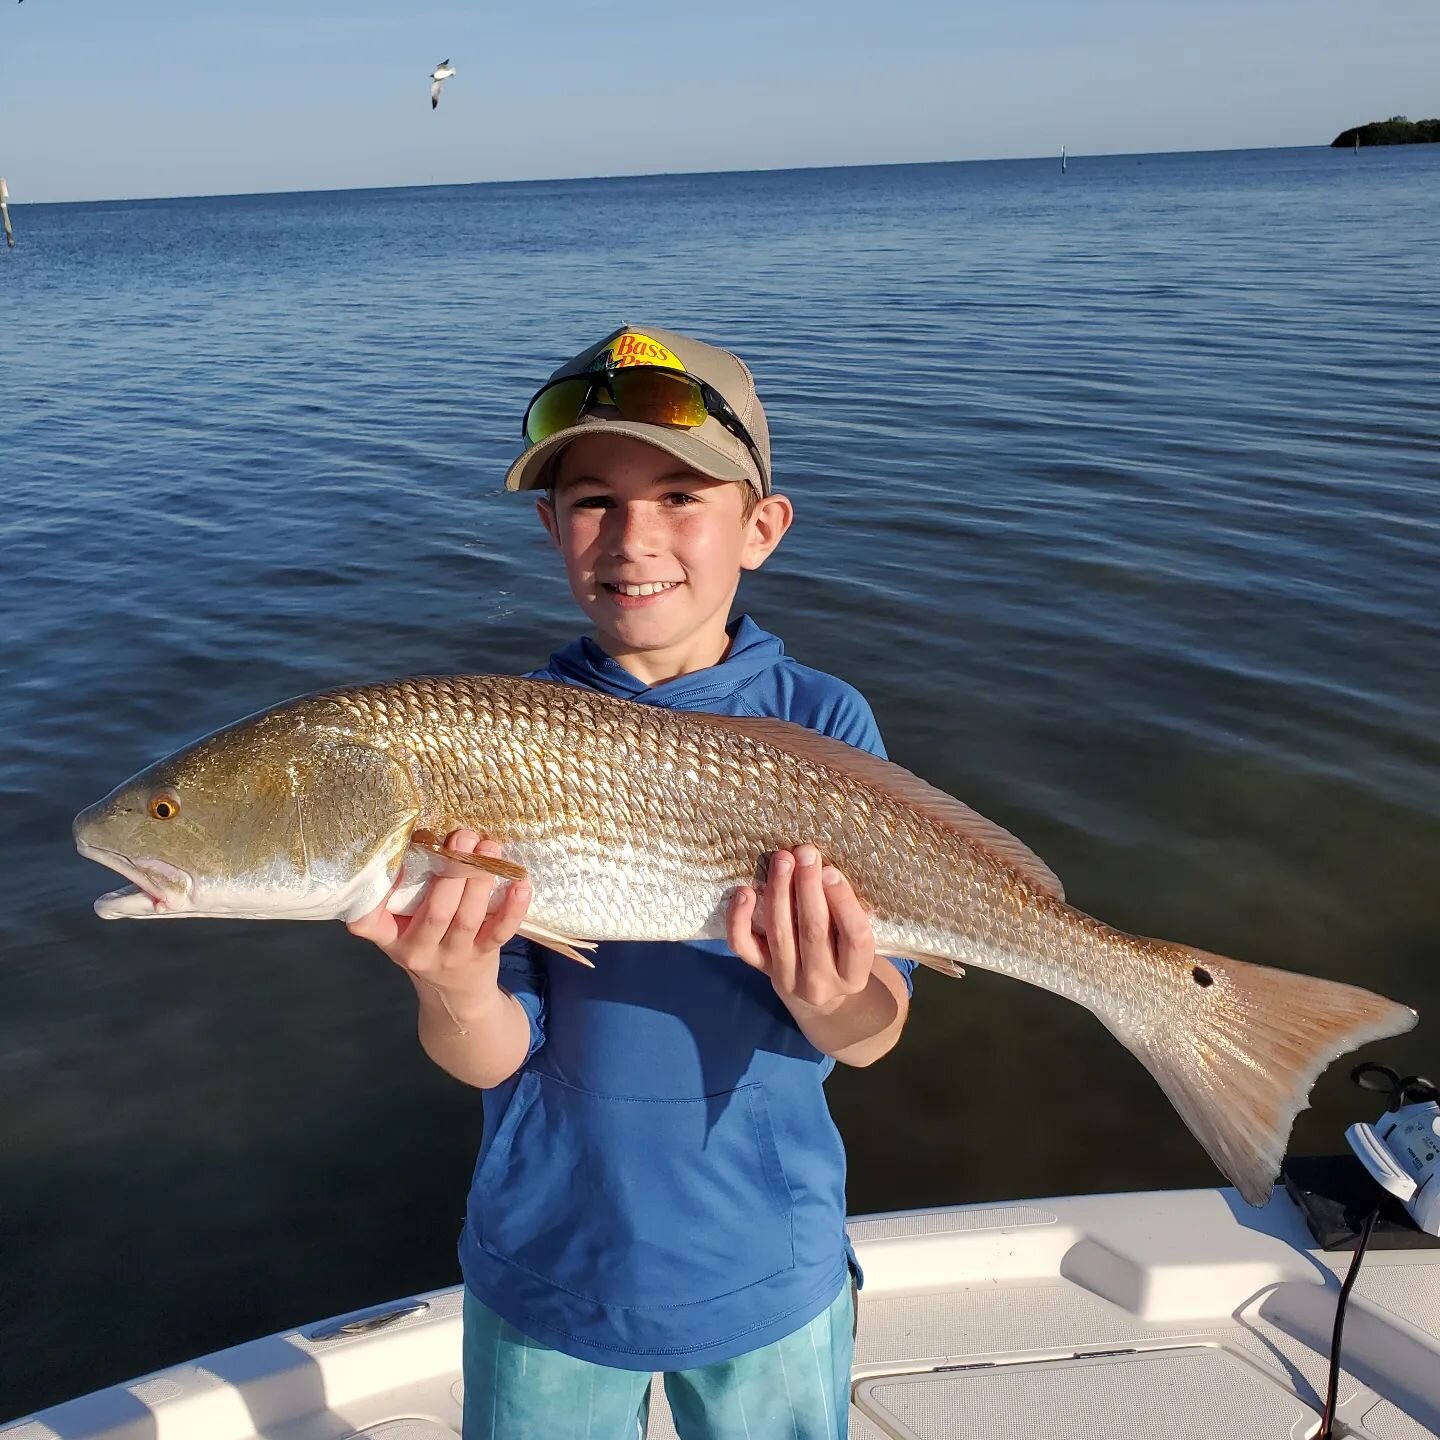 Carltons smile on his face and the natural reaction you get from his excitement is truly what it's all about. Take a kid fishing!
www.storymakerfishingcharters.com 
813-431-9205  Come get some!

@pennfishing @simradyachting @saltlife @cca_florida @re